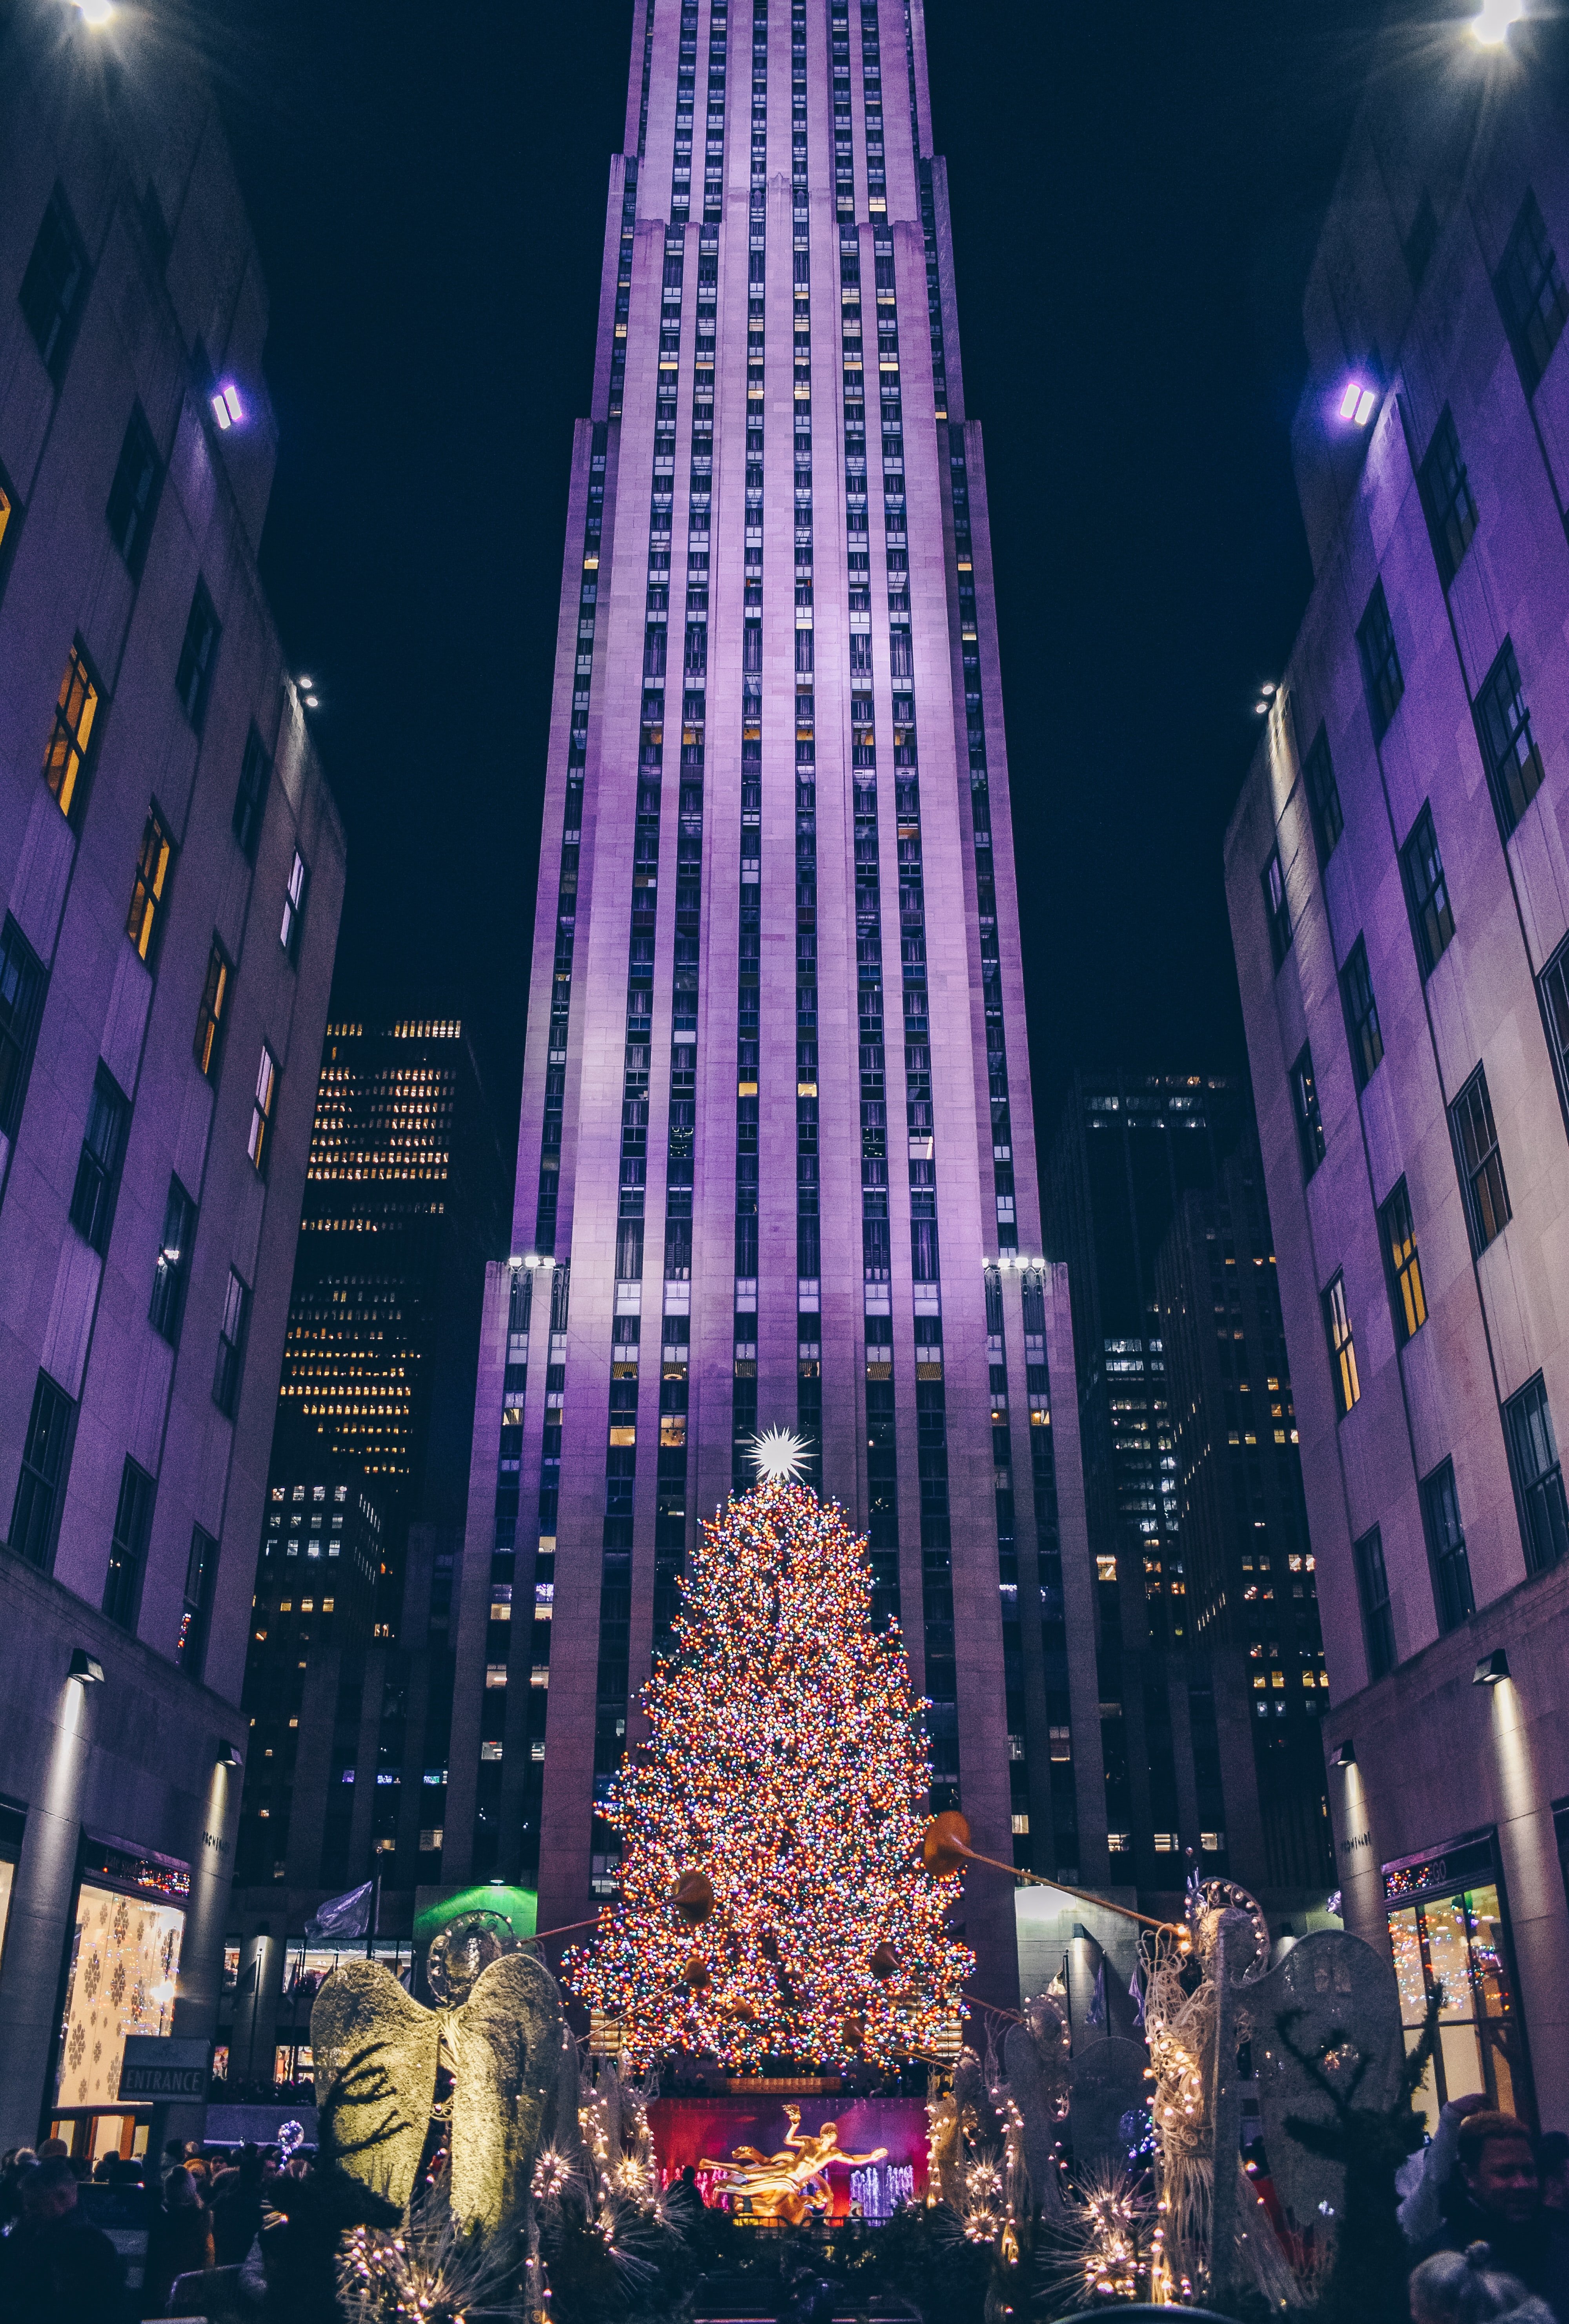 Christmas in New York is very special.